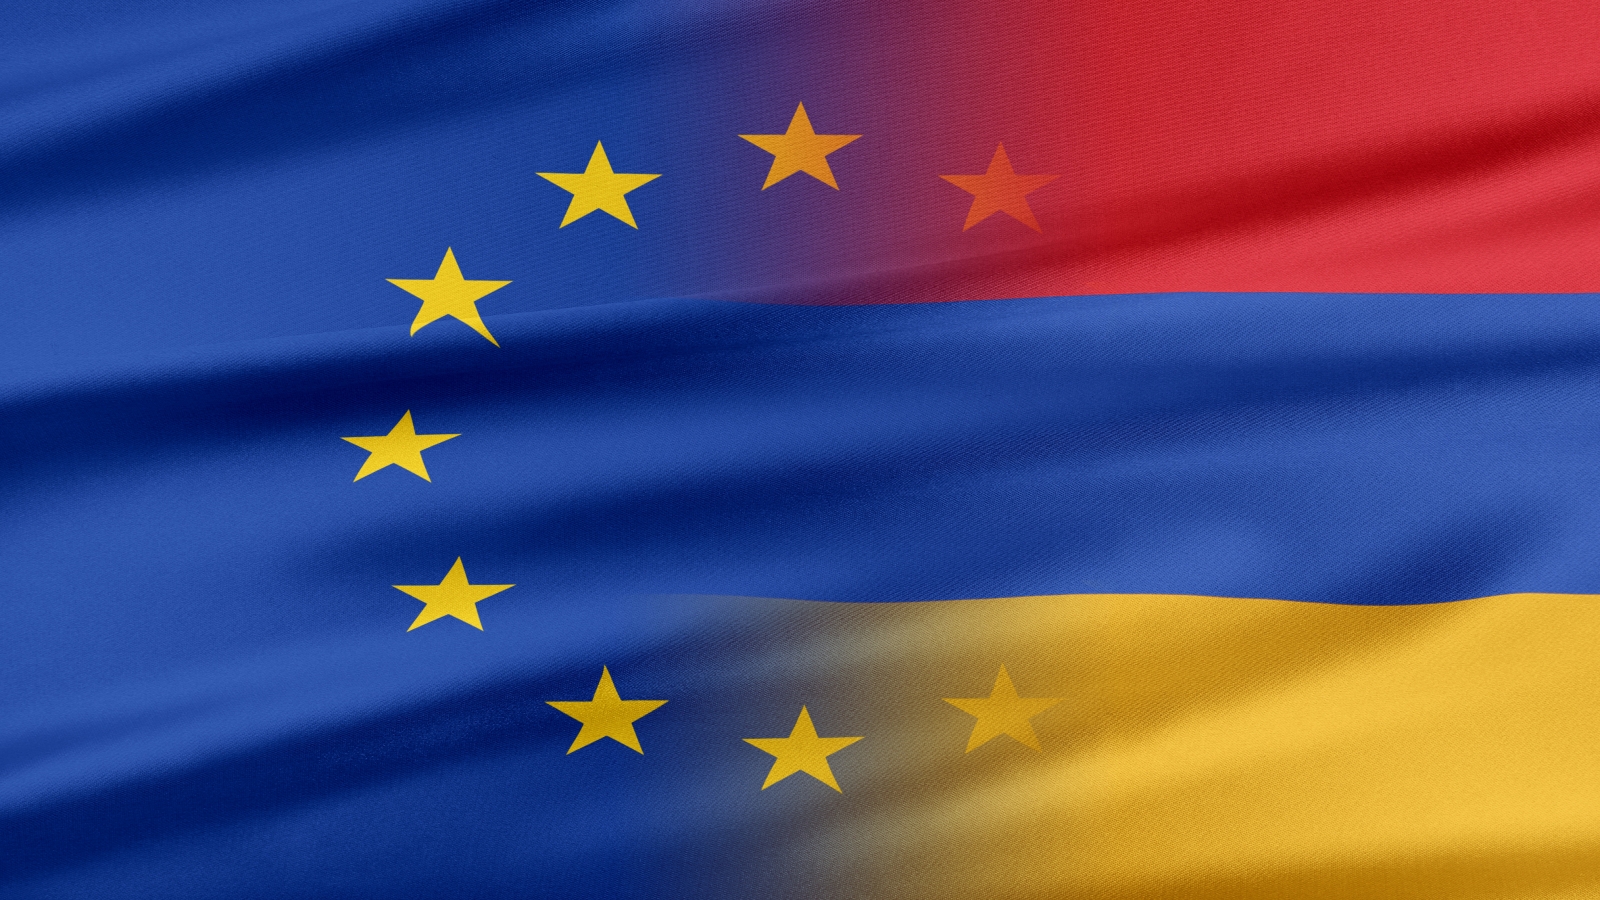 Vayots Dzor to Have a New Solar Power Plant with the Support of the European Union